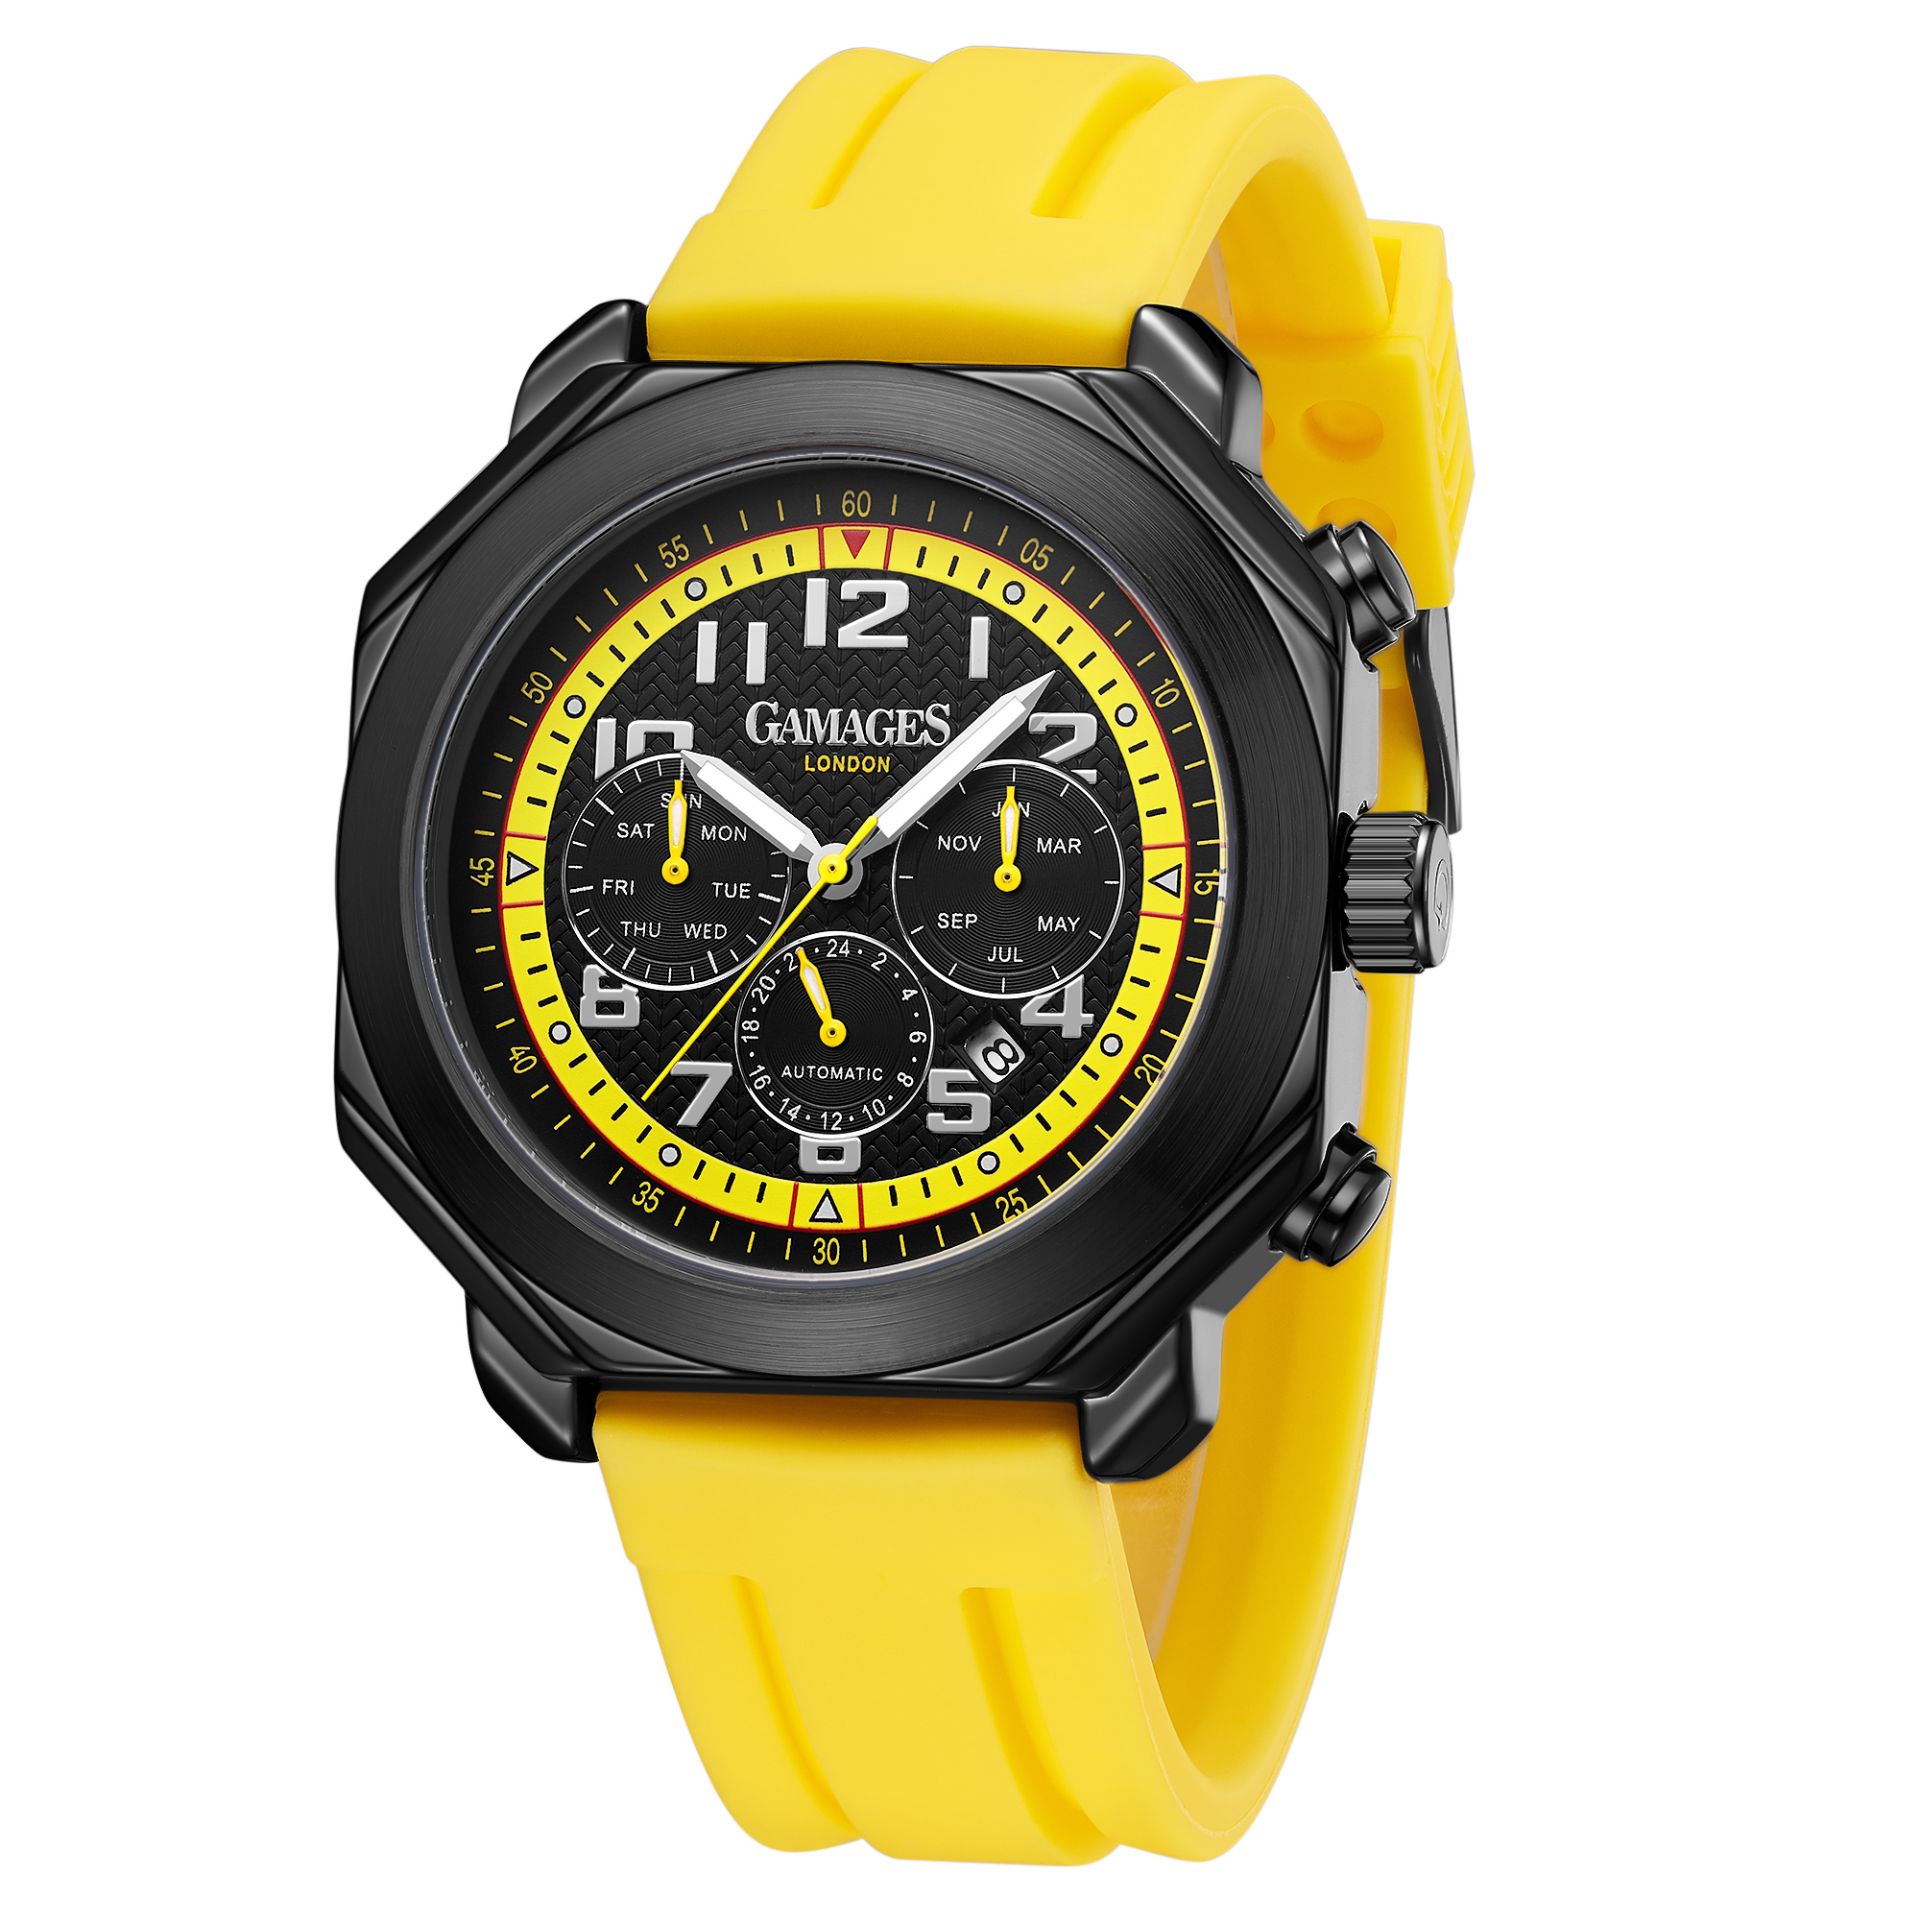 Ltd Edition Hand Assembled Gamages Contemporary Automatic Yellow Ð 5 Year Warranty & Free Delivery - Image 4 of 5